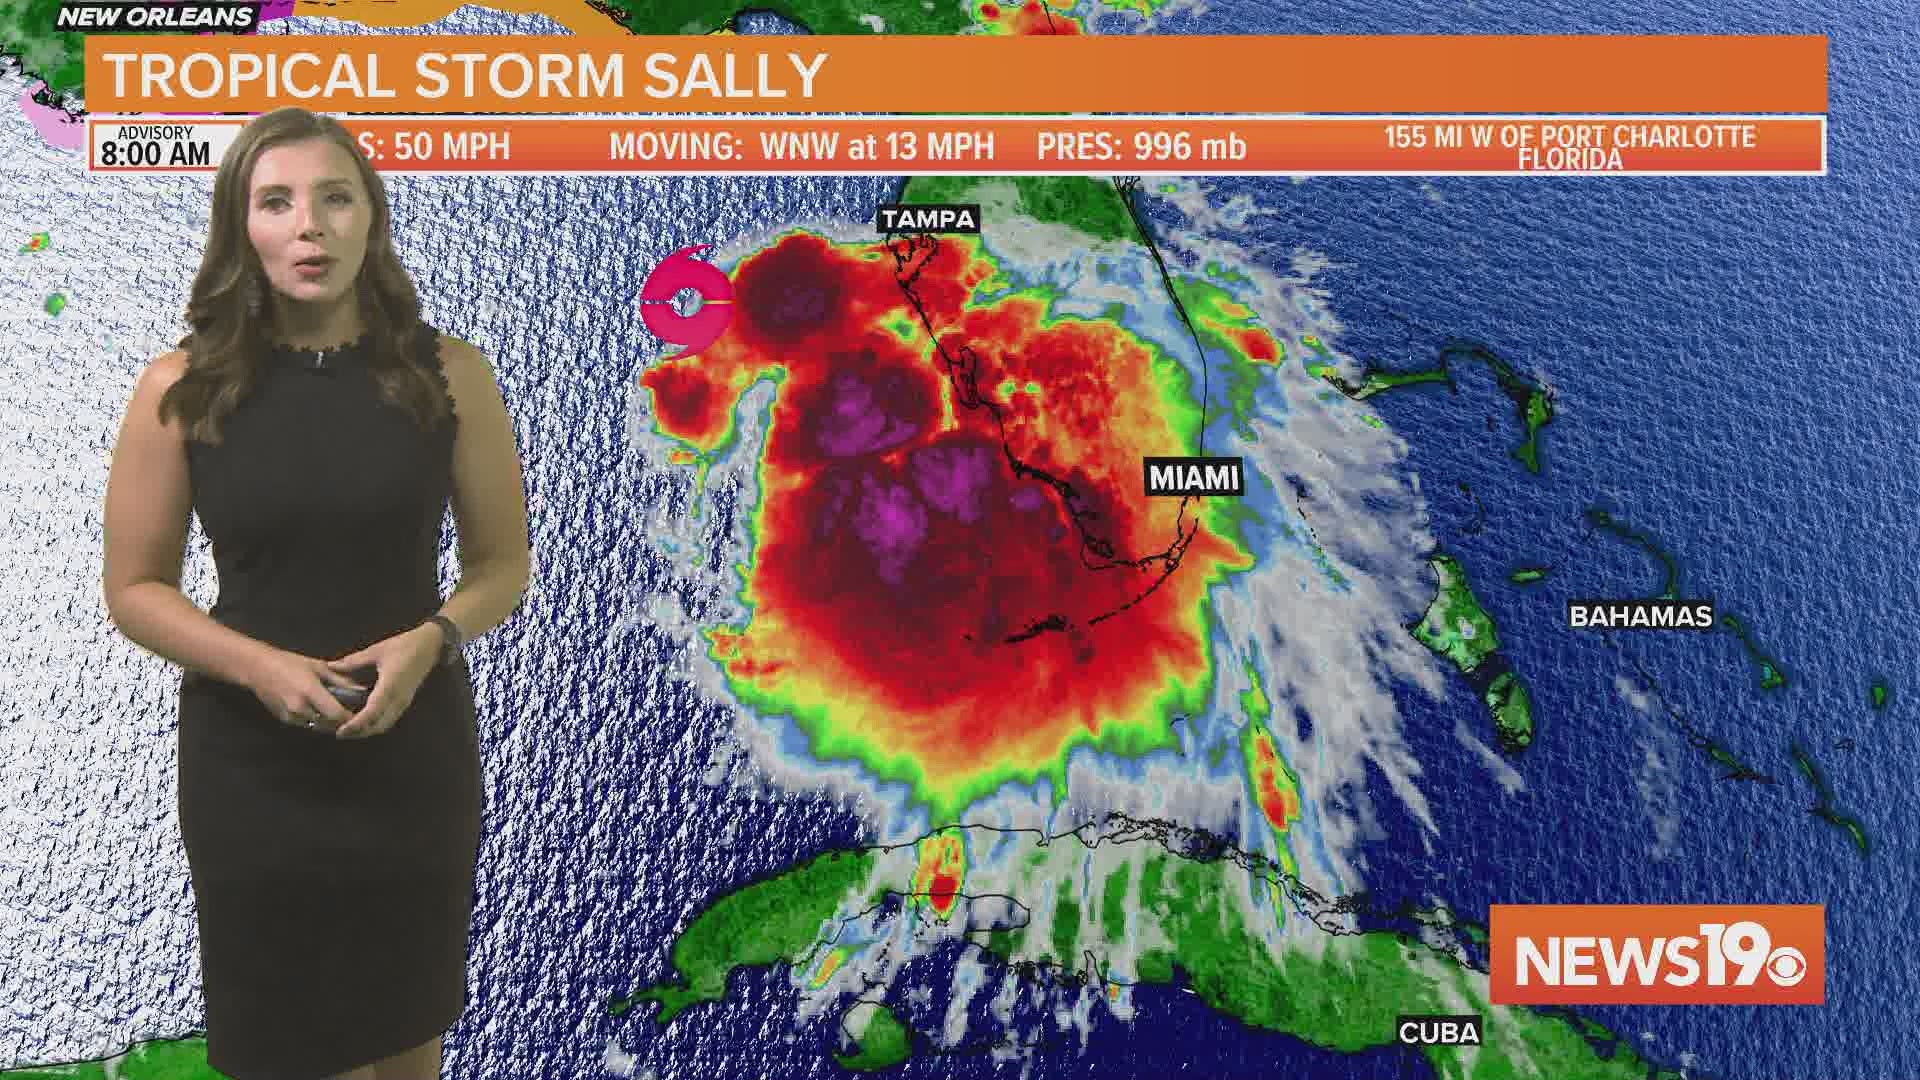 Tropical Storm Sally is likely to intensify over the Gulf over the next 48 hours. There are five other systems the NHC is watching.